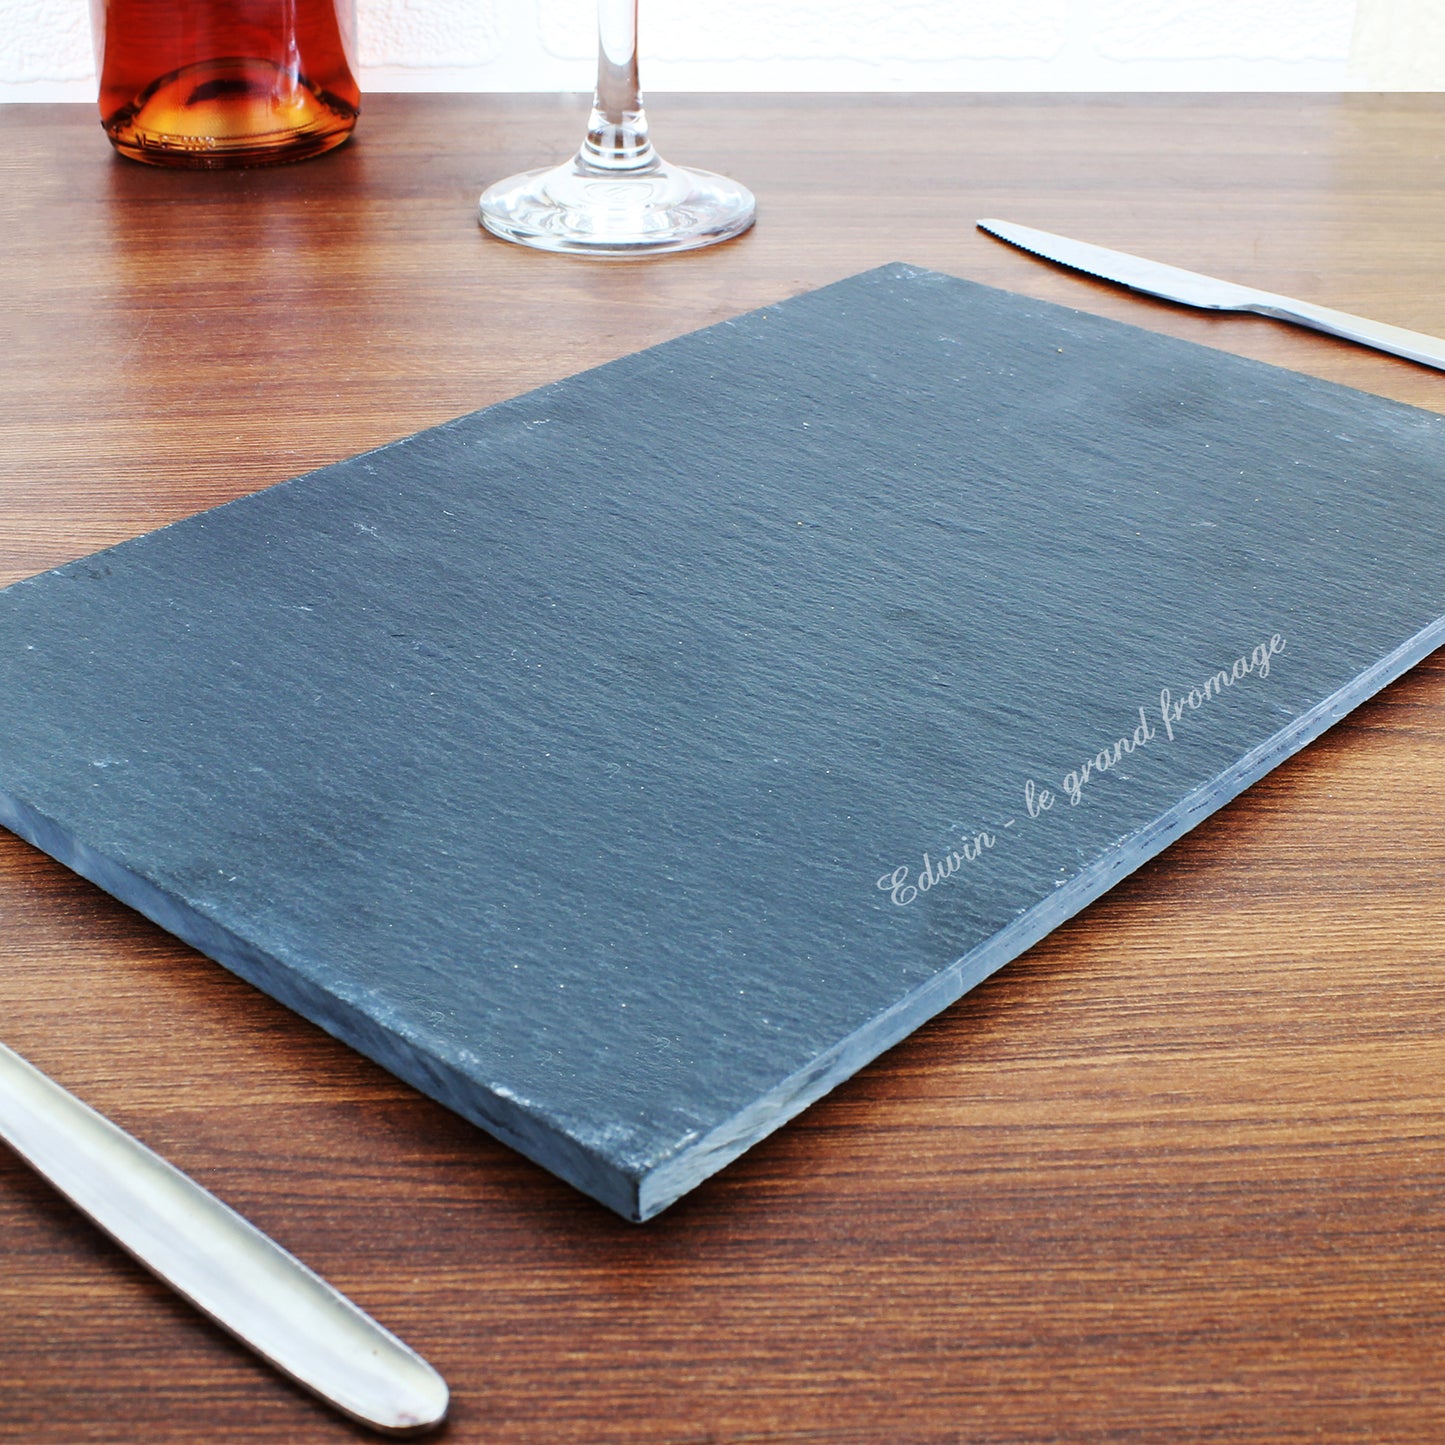 Personalised Engraved Slate Placemat - Personalise It!